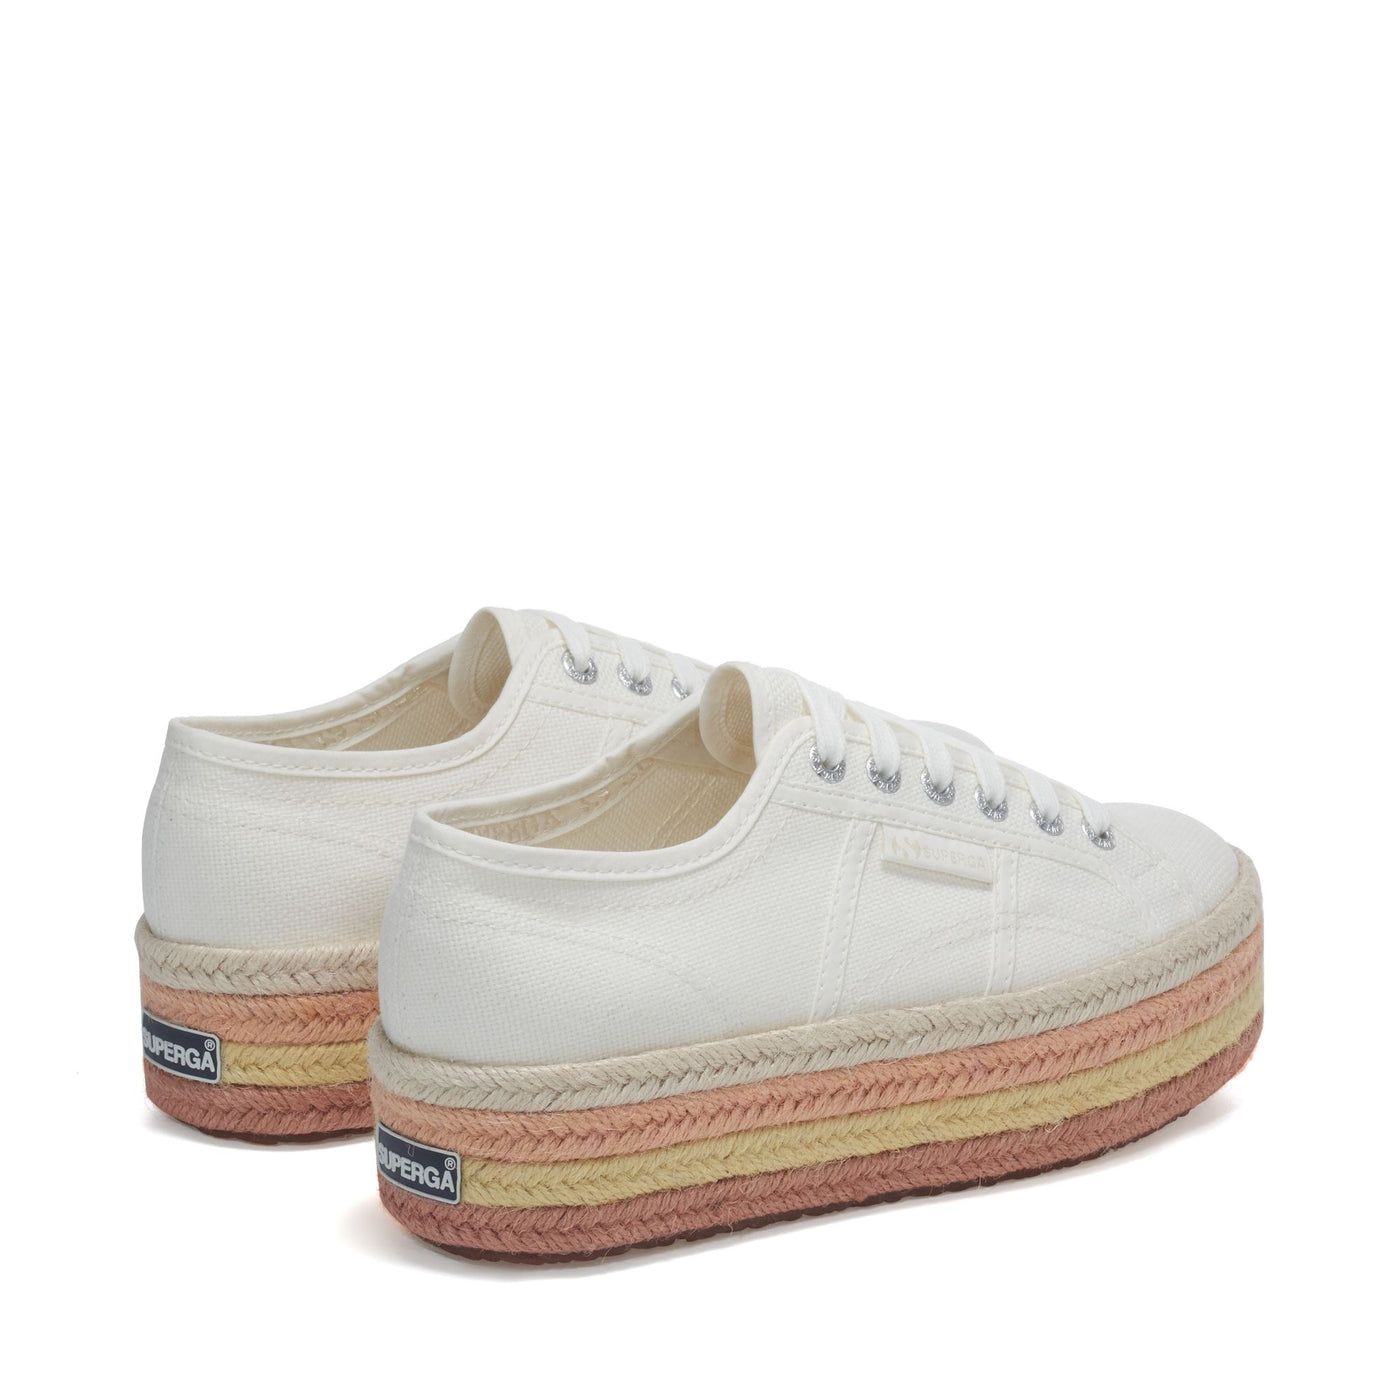 Lady Shoes Woman 2790 MULTICOLOR ROPE Wedge WHITE AVORIO-BGESSO-OAPRICOT-BGOMME-PDUSTY Dressed Side (jpg Rgb)		